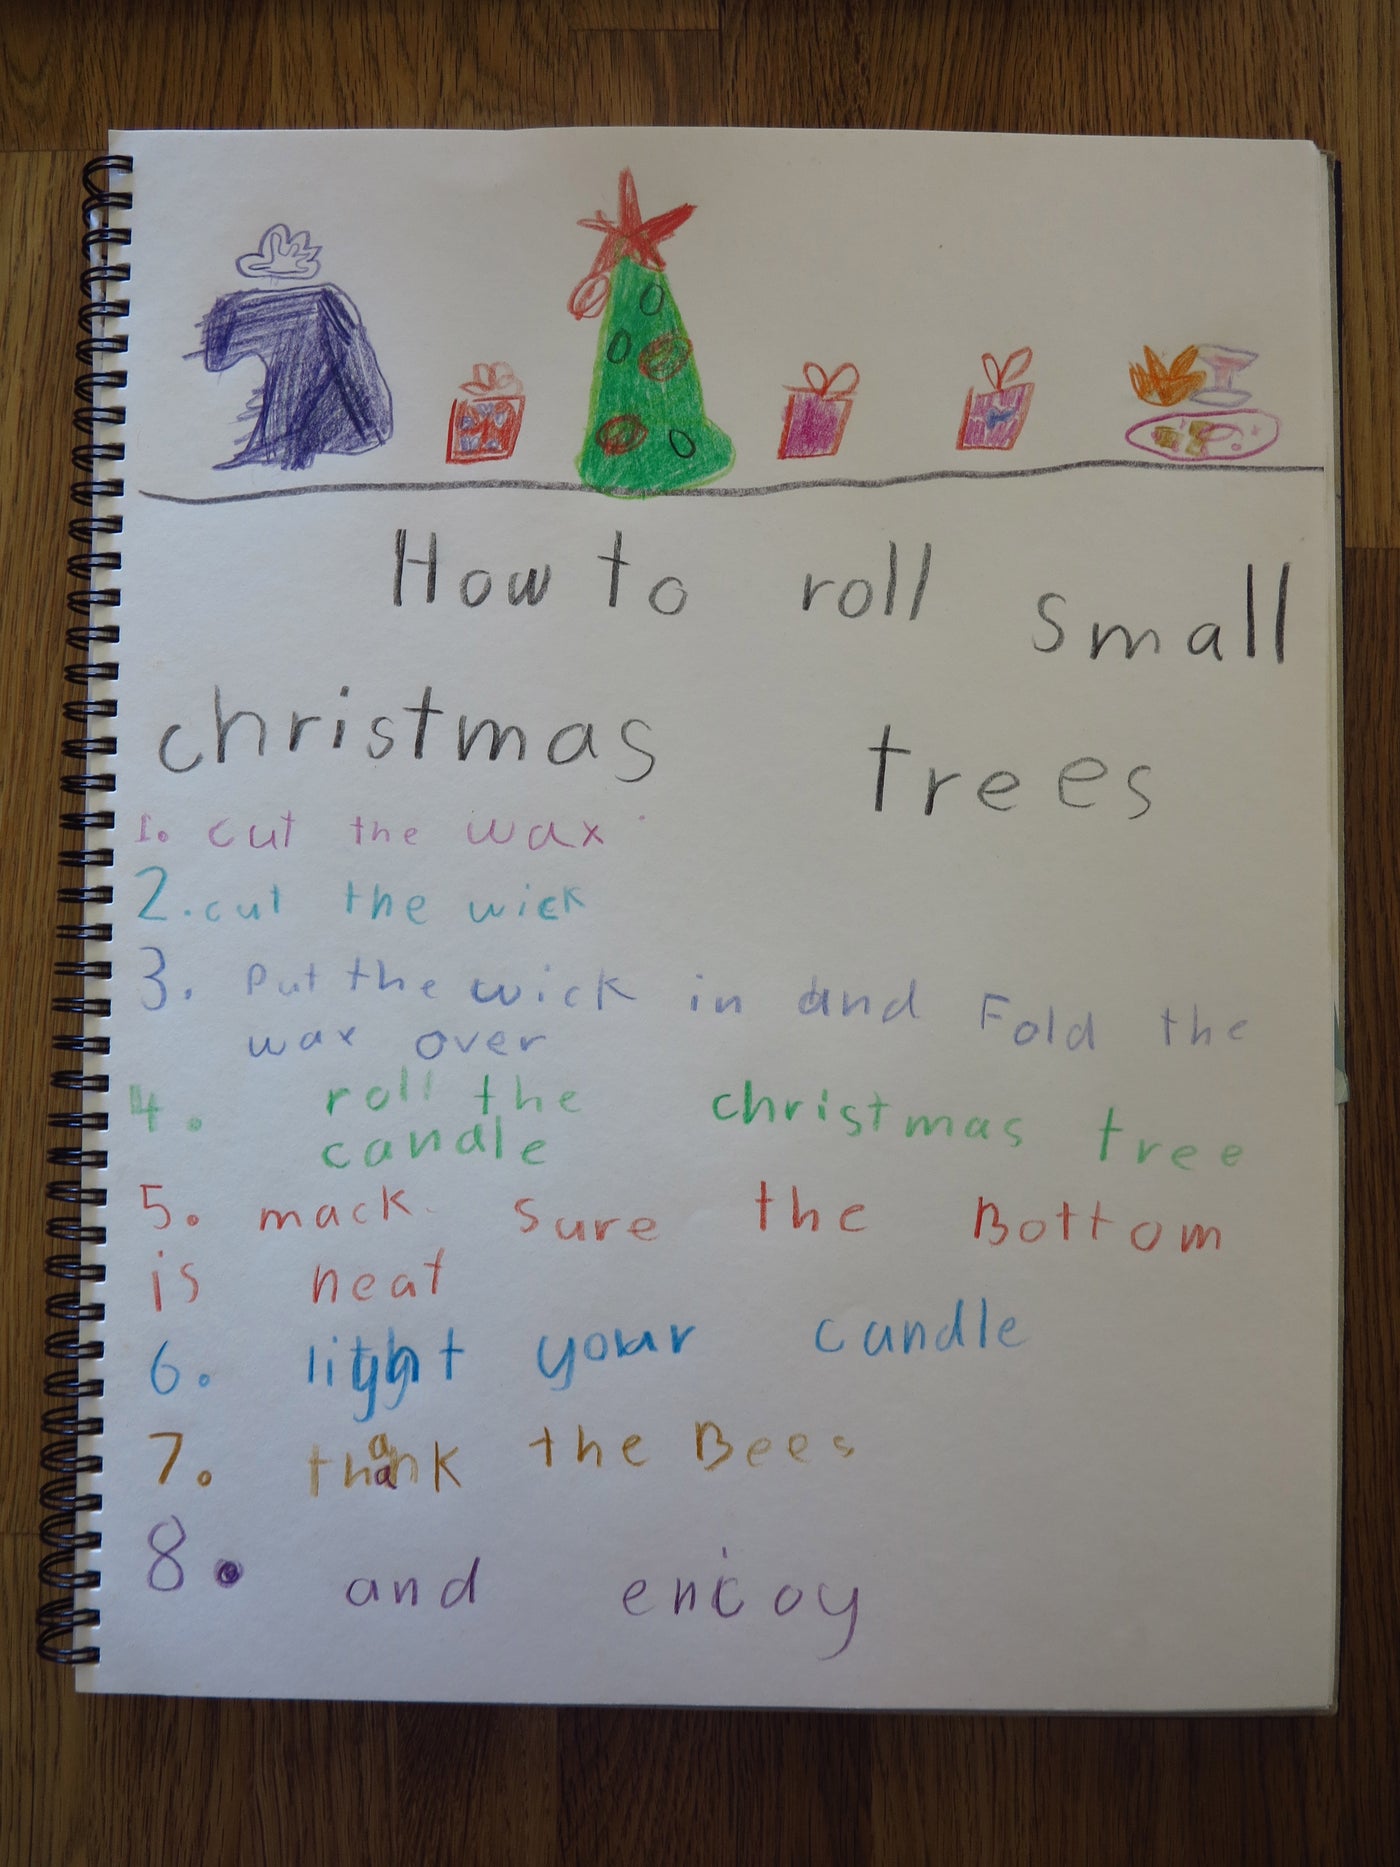 Make Your Own Christmas Gifts - 6 year old style